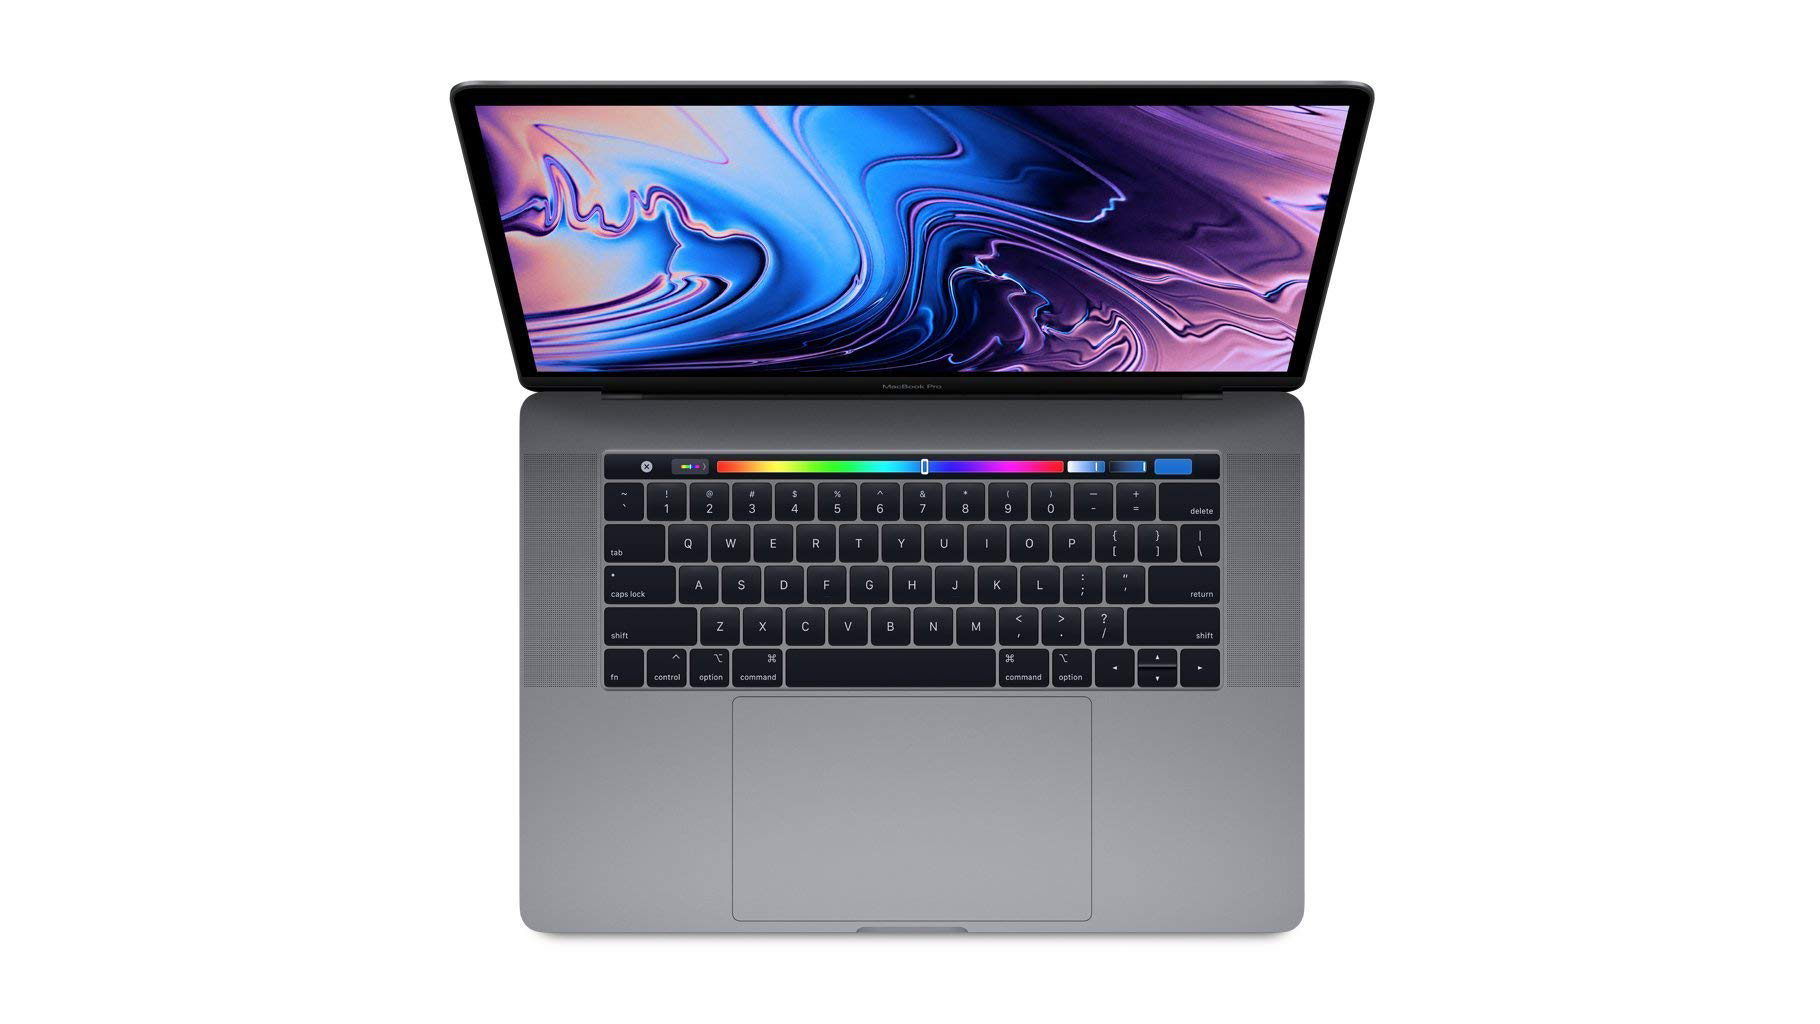 Apple MacBook Pro 2019 prices fall to an all-time low | Creative Bloq